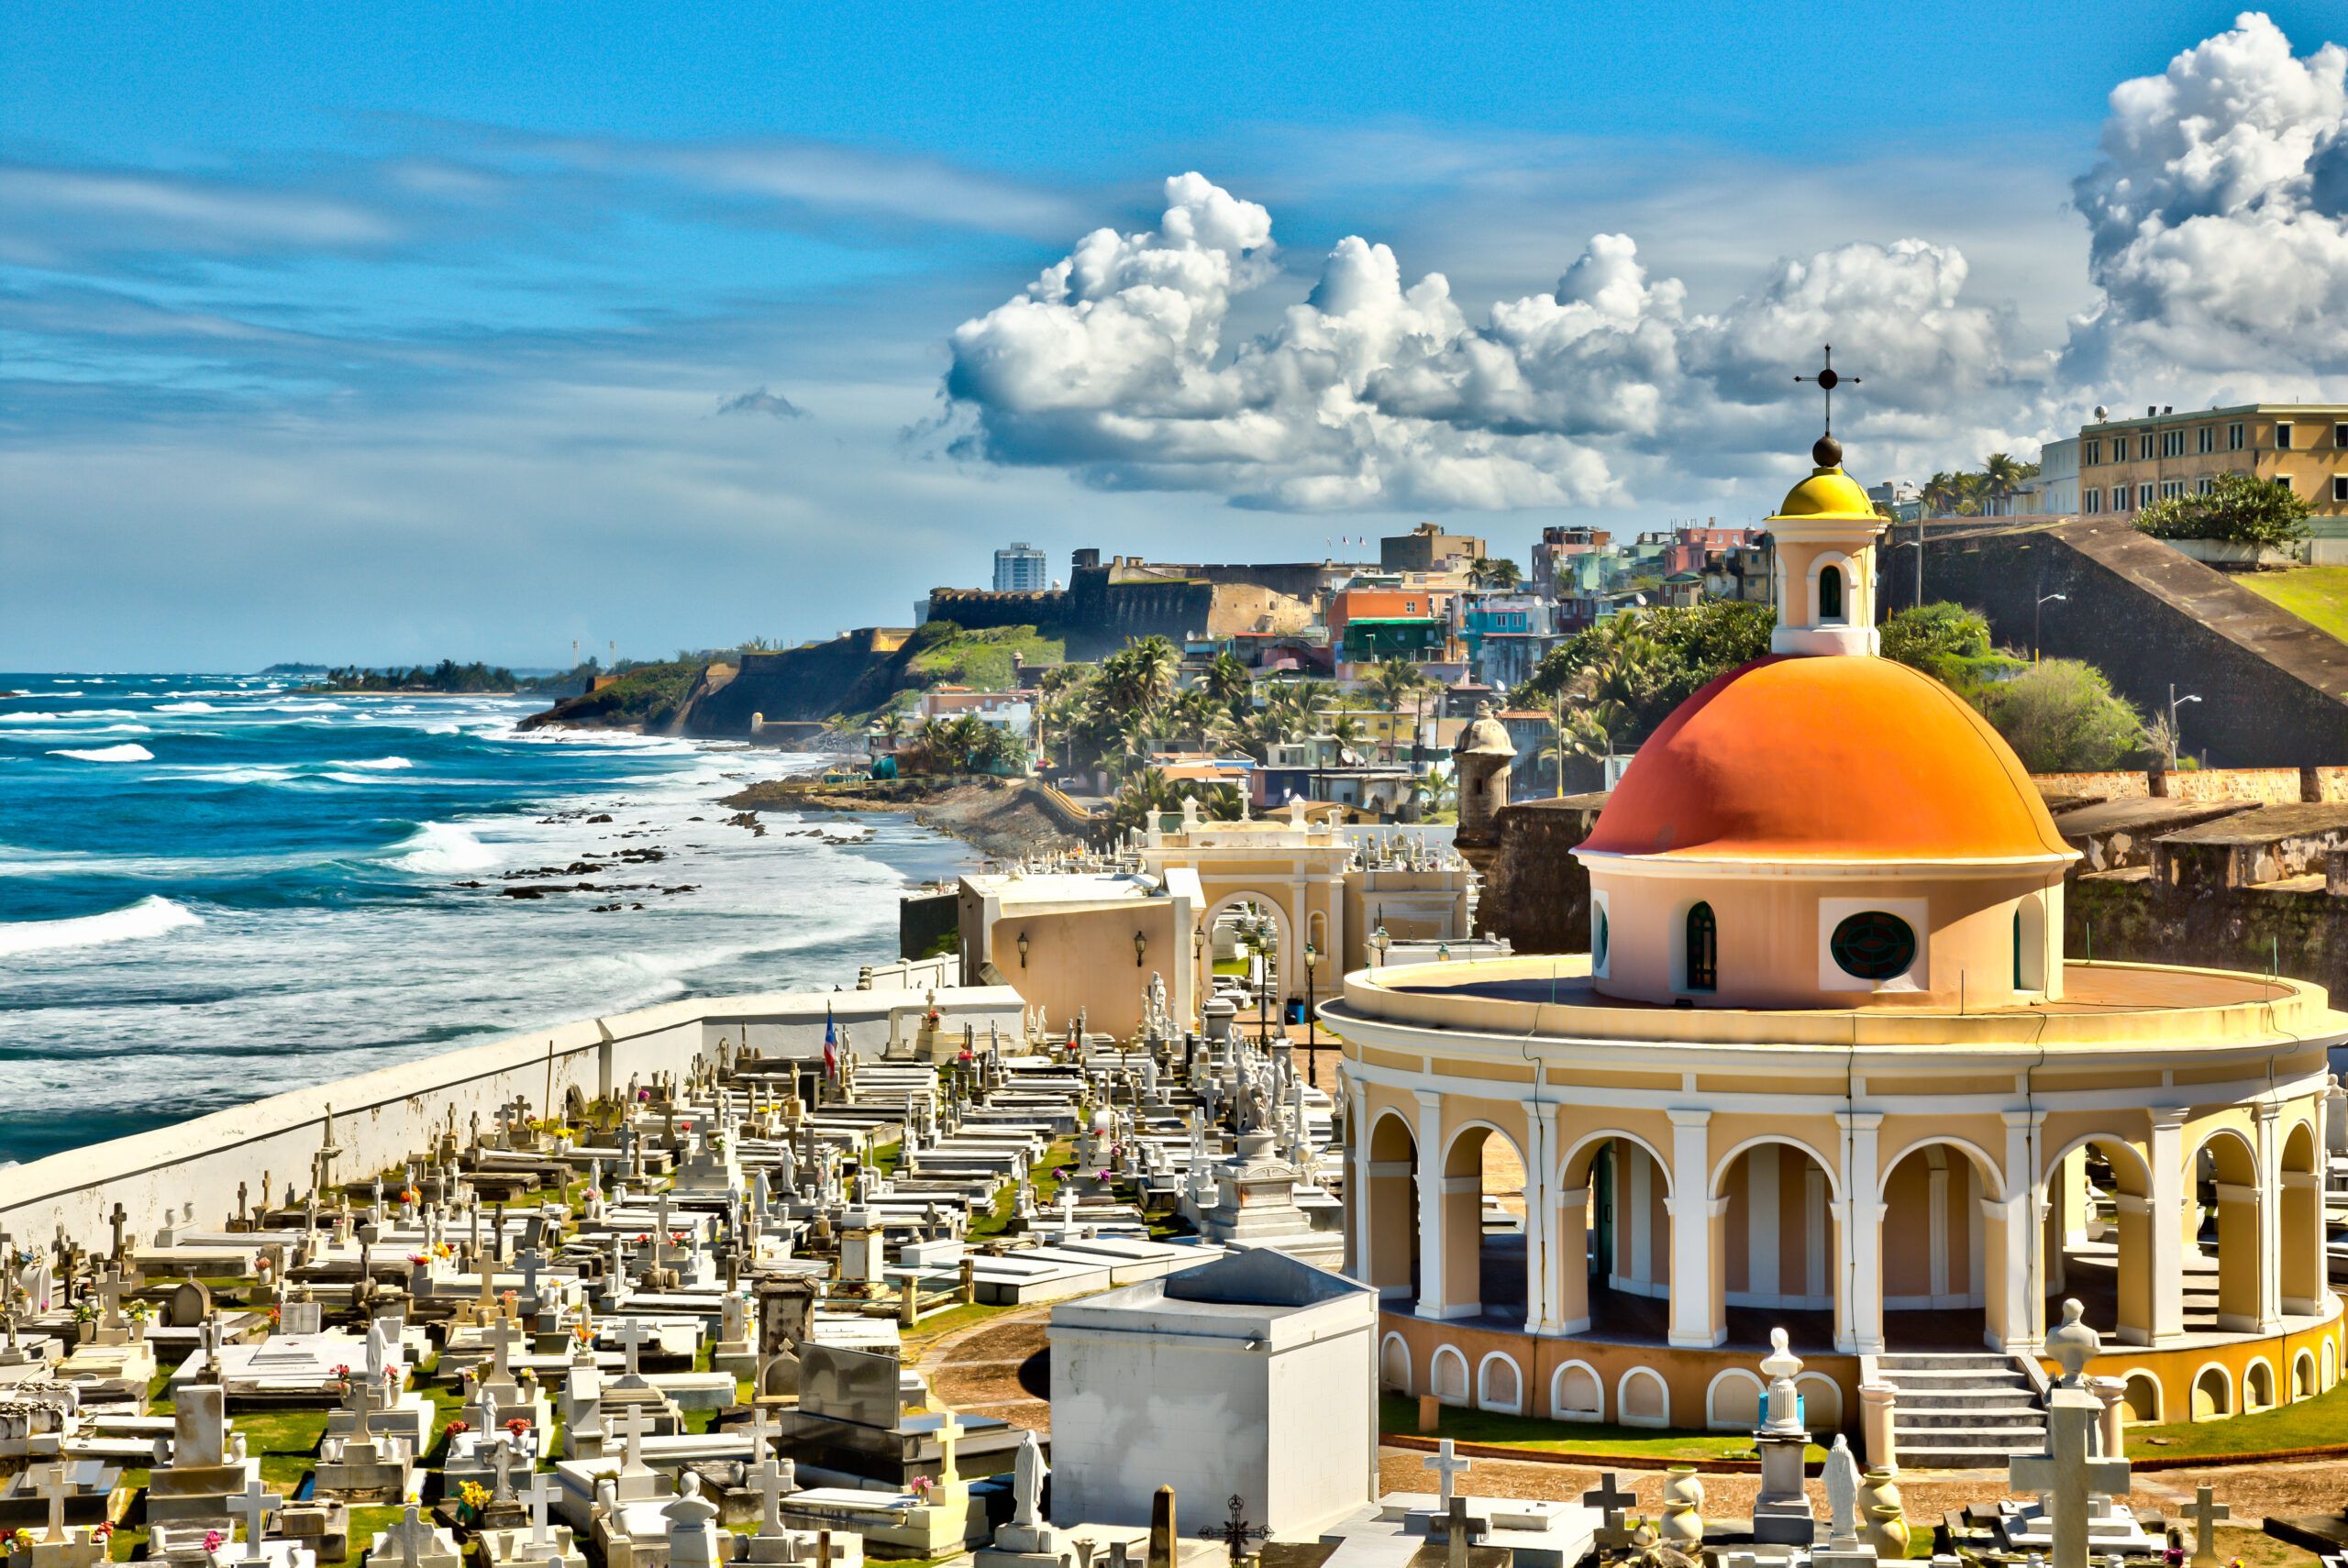 "View of the coast from the cemetery at Old San Juan, Puerto Rico."